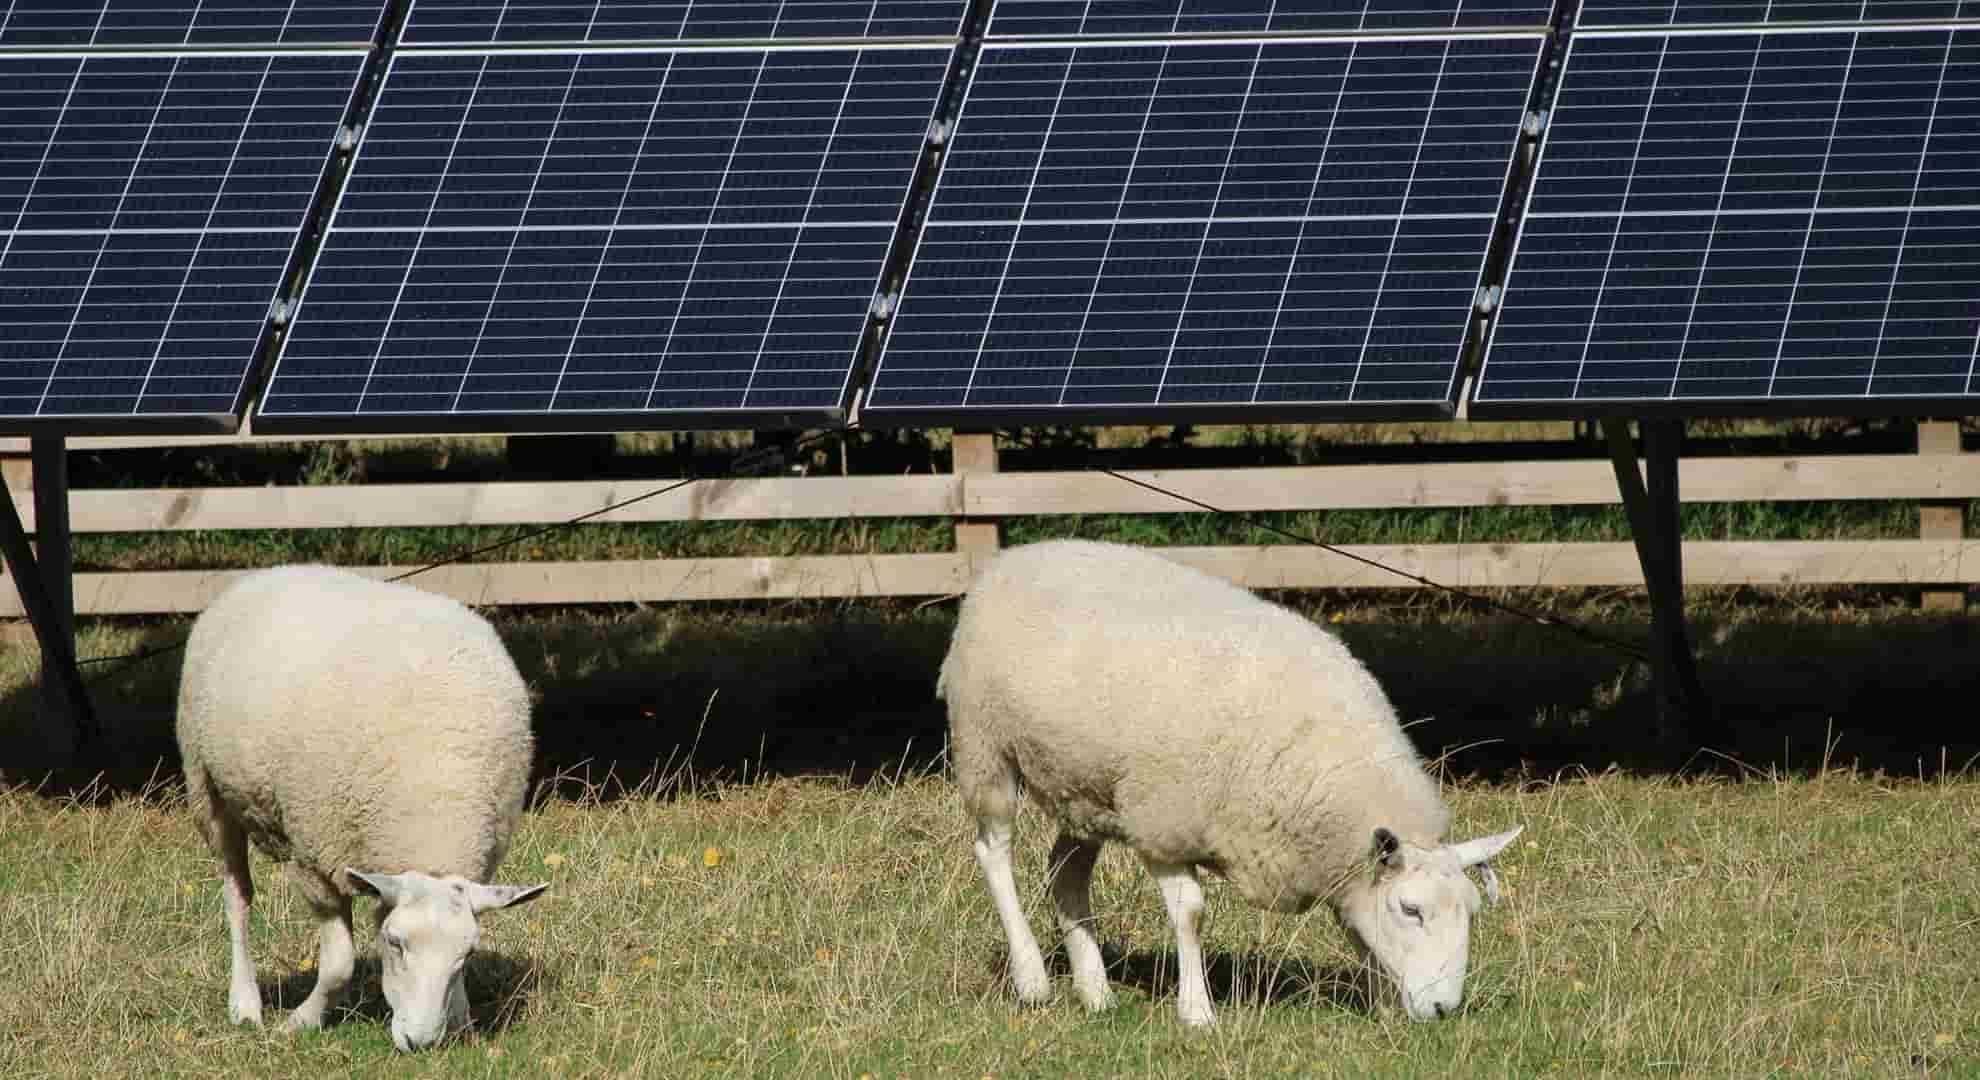 grazing sheep in front of large solar panels